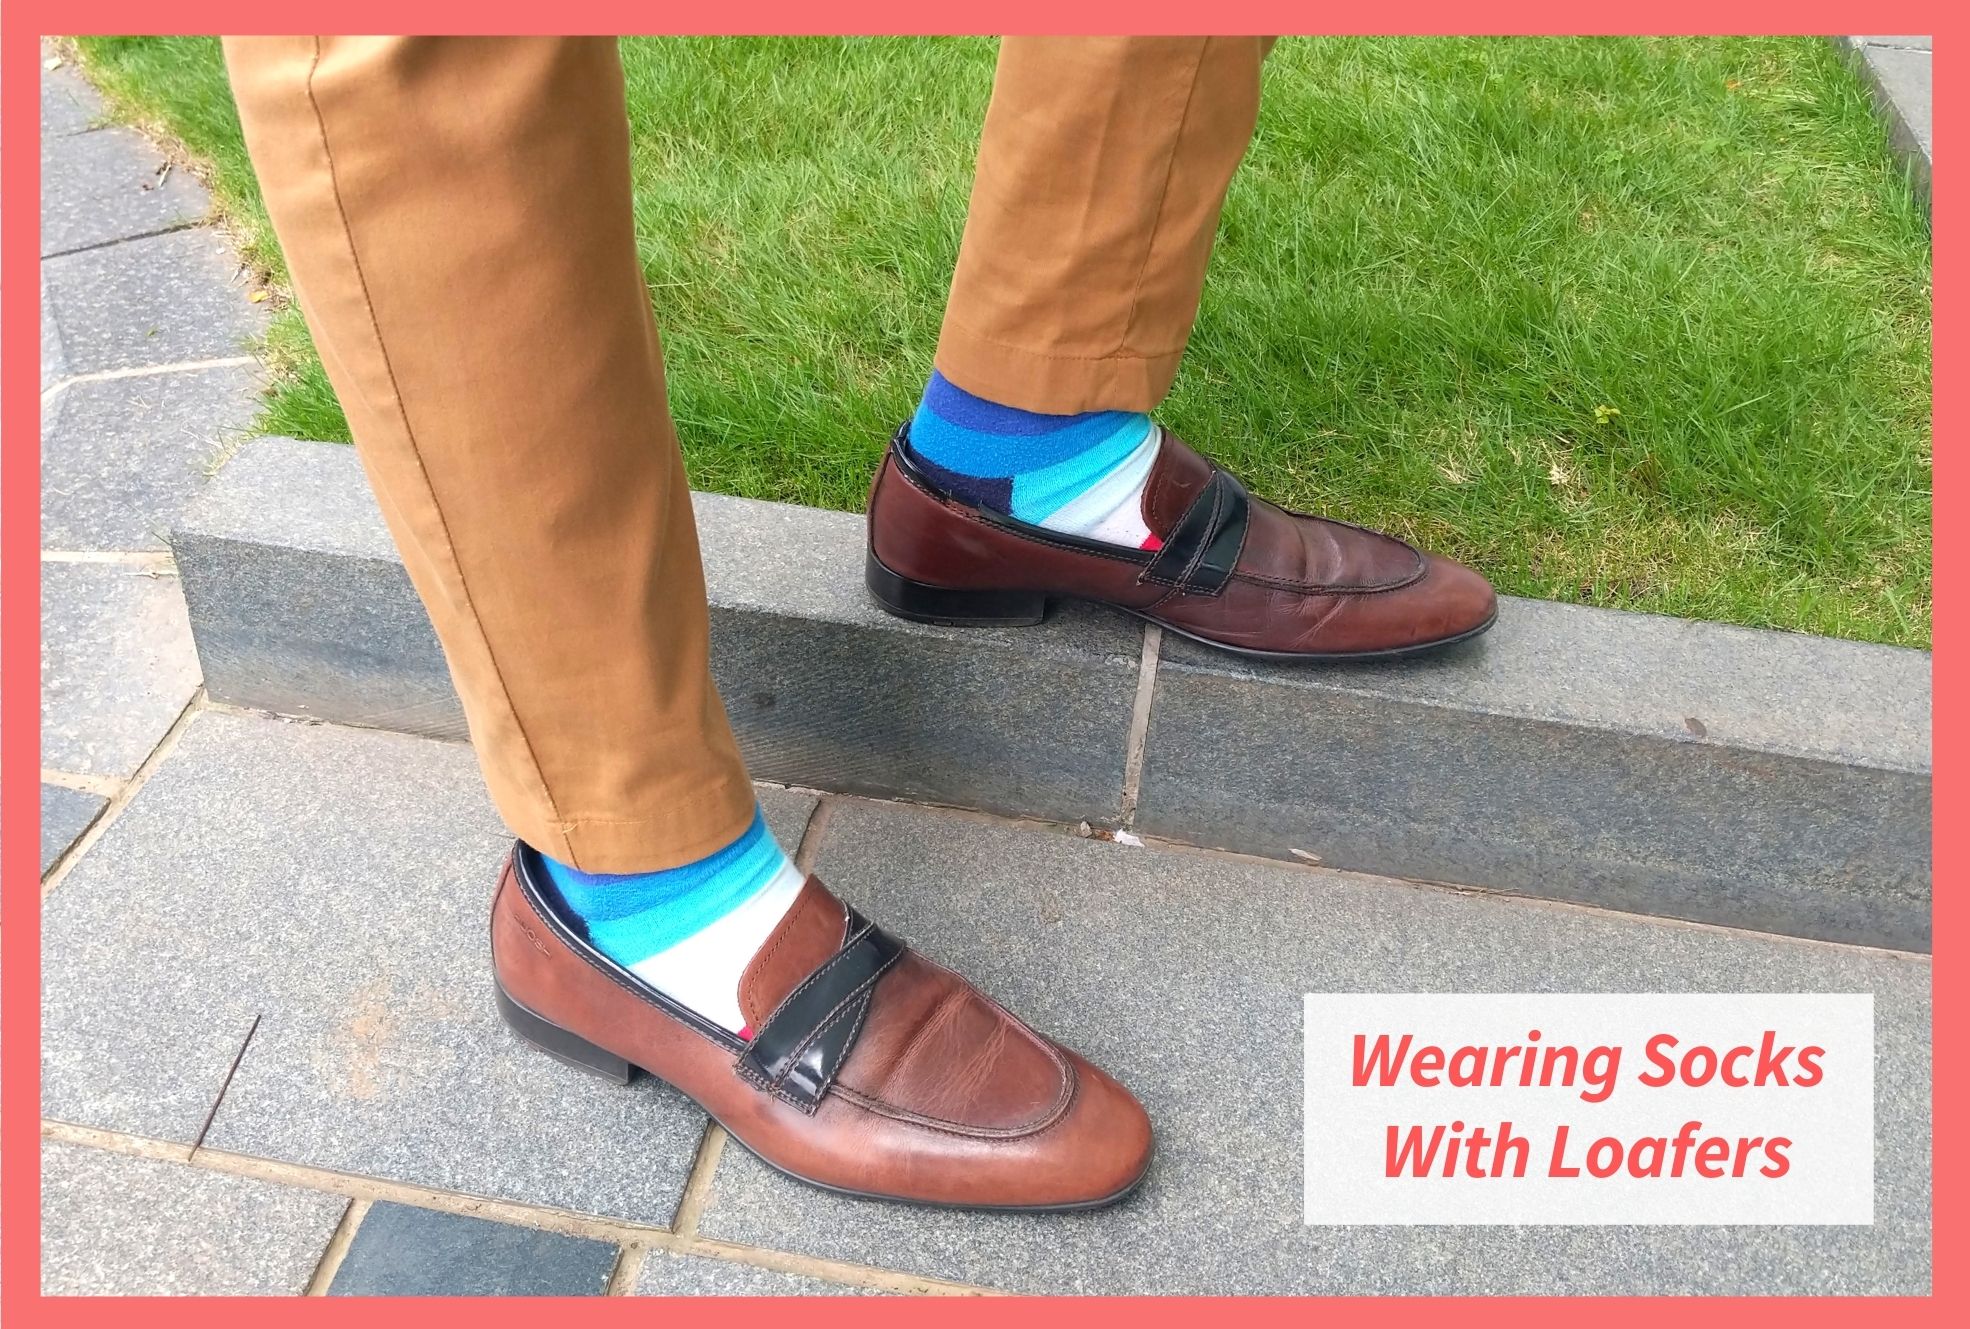 Do You Wear Socks With Loafers? Here's Why..